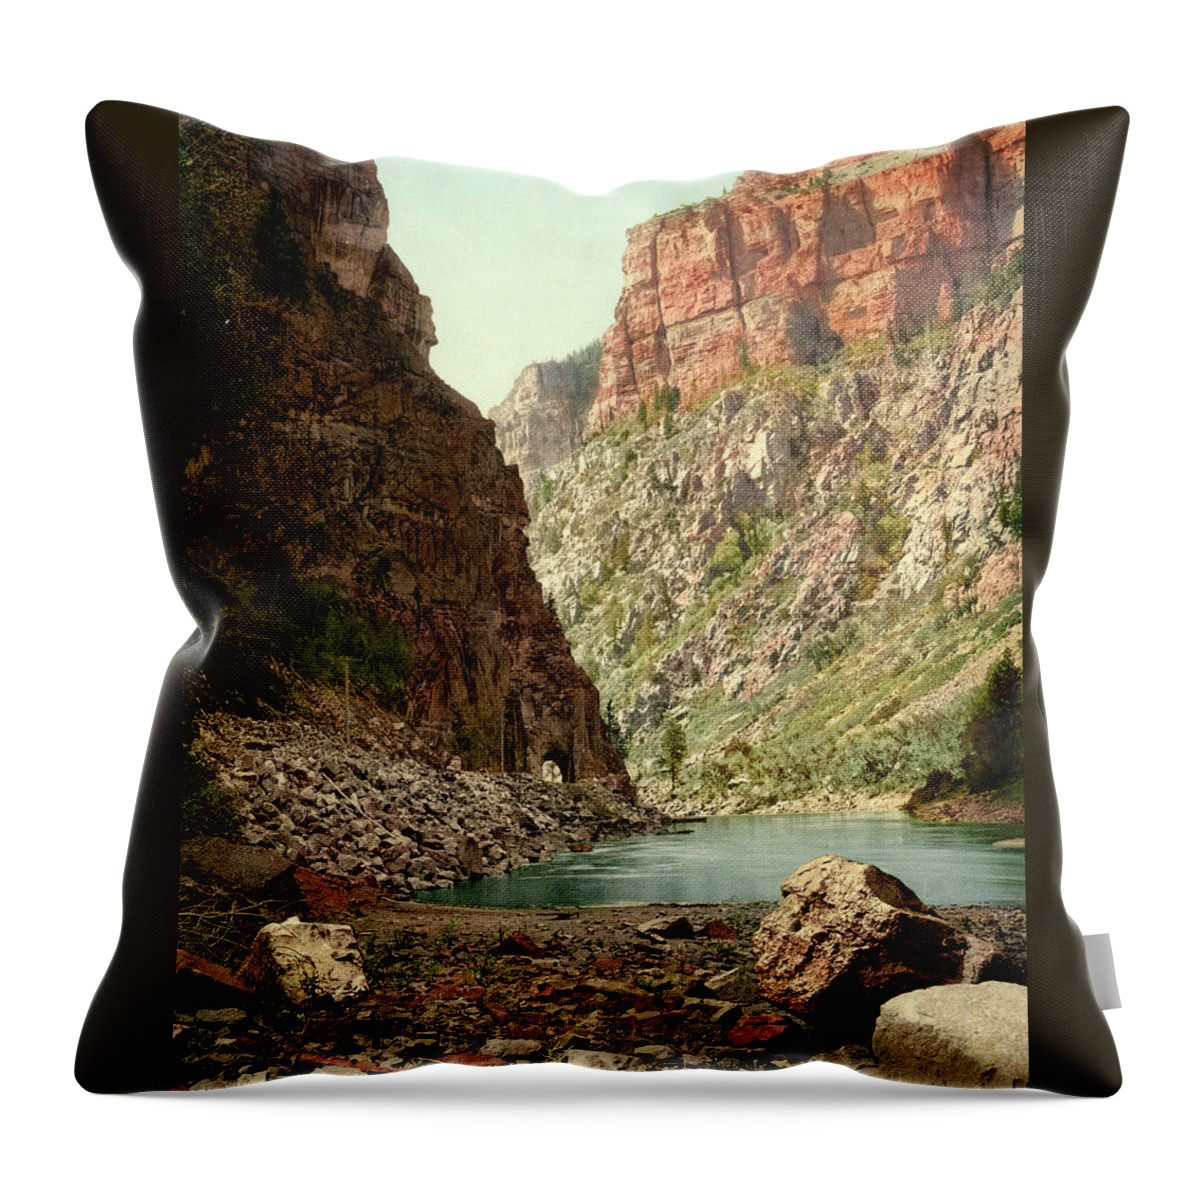  Throw Pillow featuring the photograph Second Tunnel, Grand River Canyon by Detroit Photographic Company